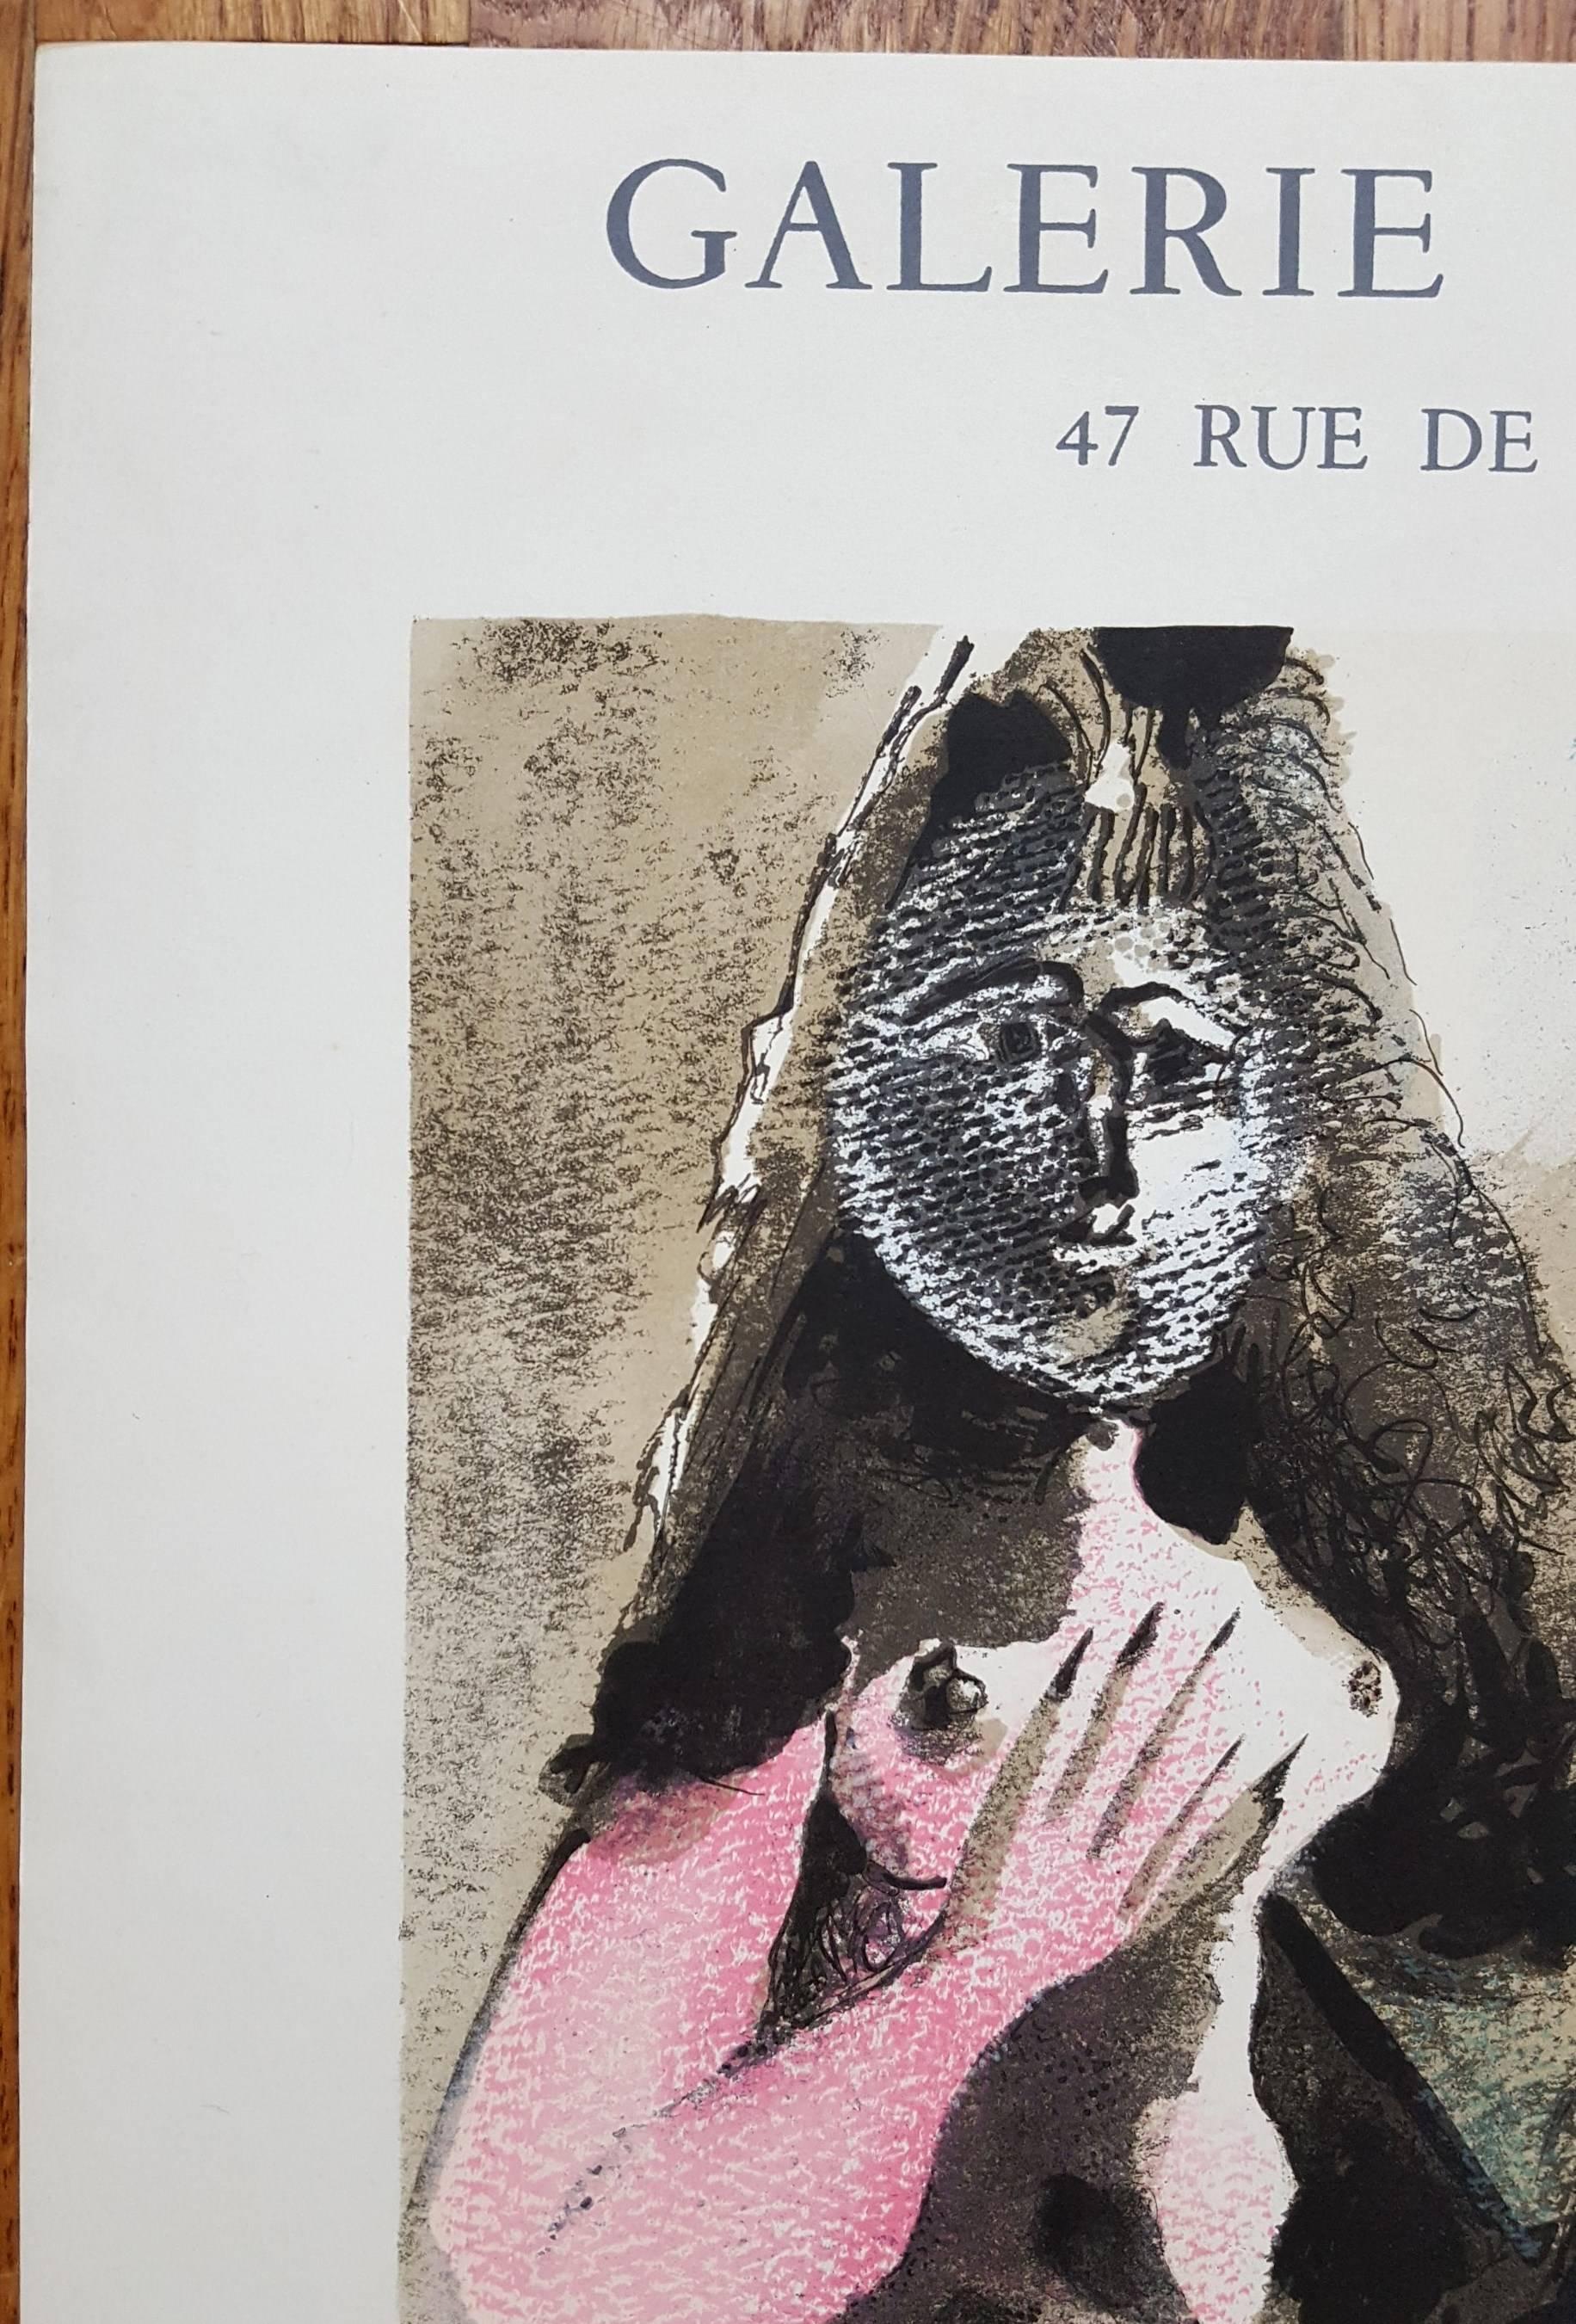 An vintage signed lithograph exhibition poster after Spanish artist Pablo Picasso (1881-1973) titled "Galerie Louis Leiris: The Painter & His Model", 1972. Signed in crayon by Picasso lower right. Lithography authorized by Picasso and